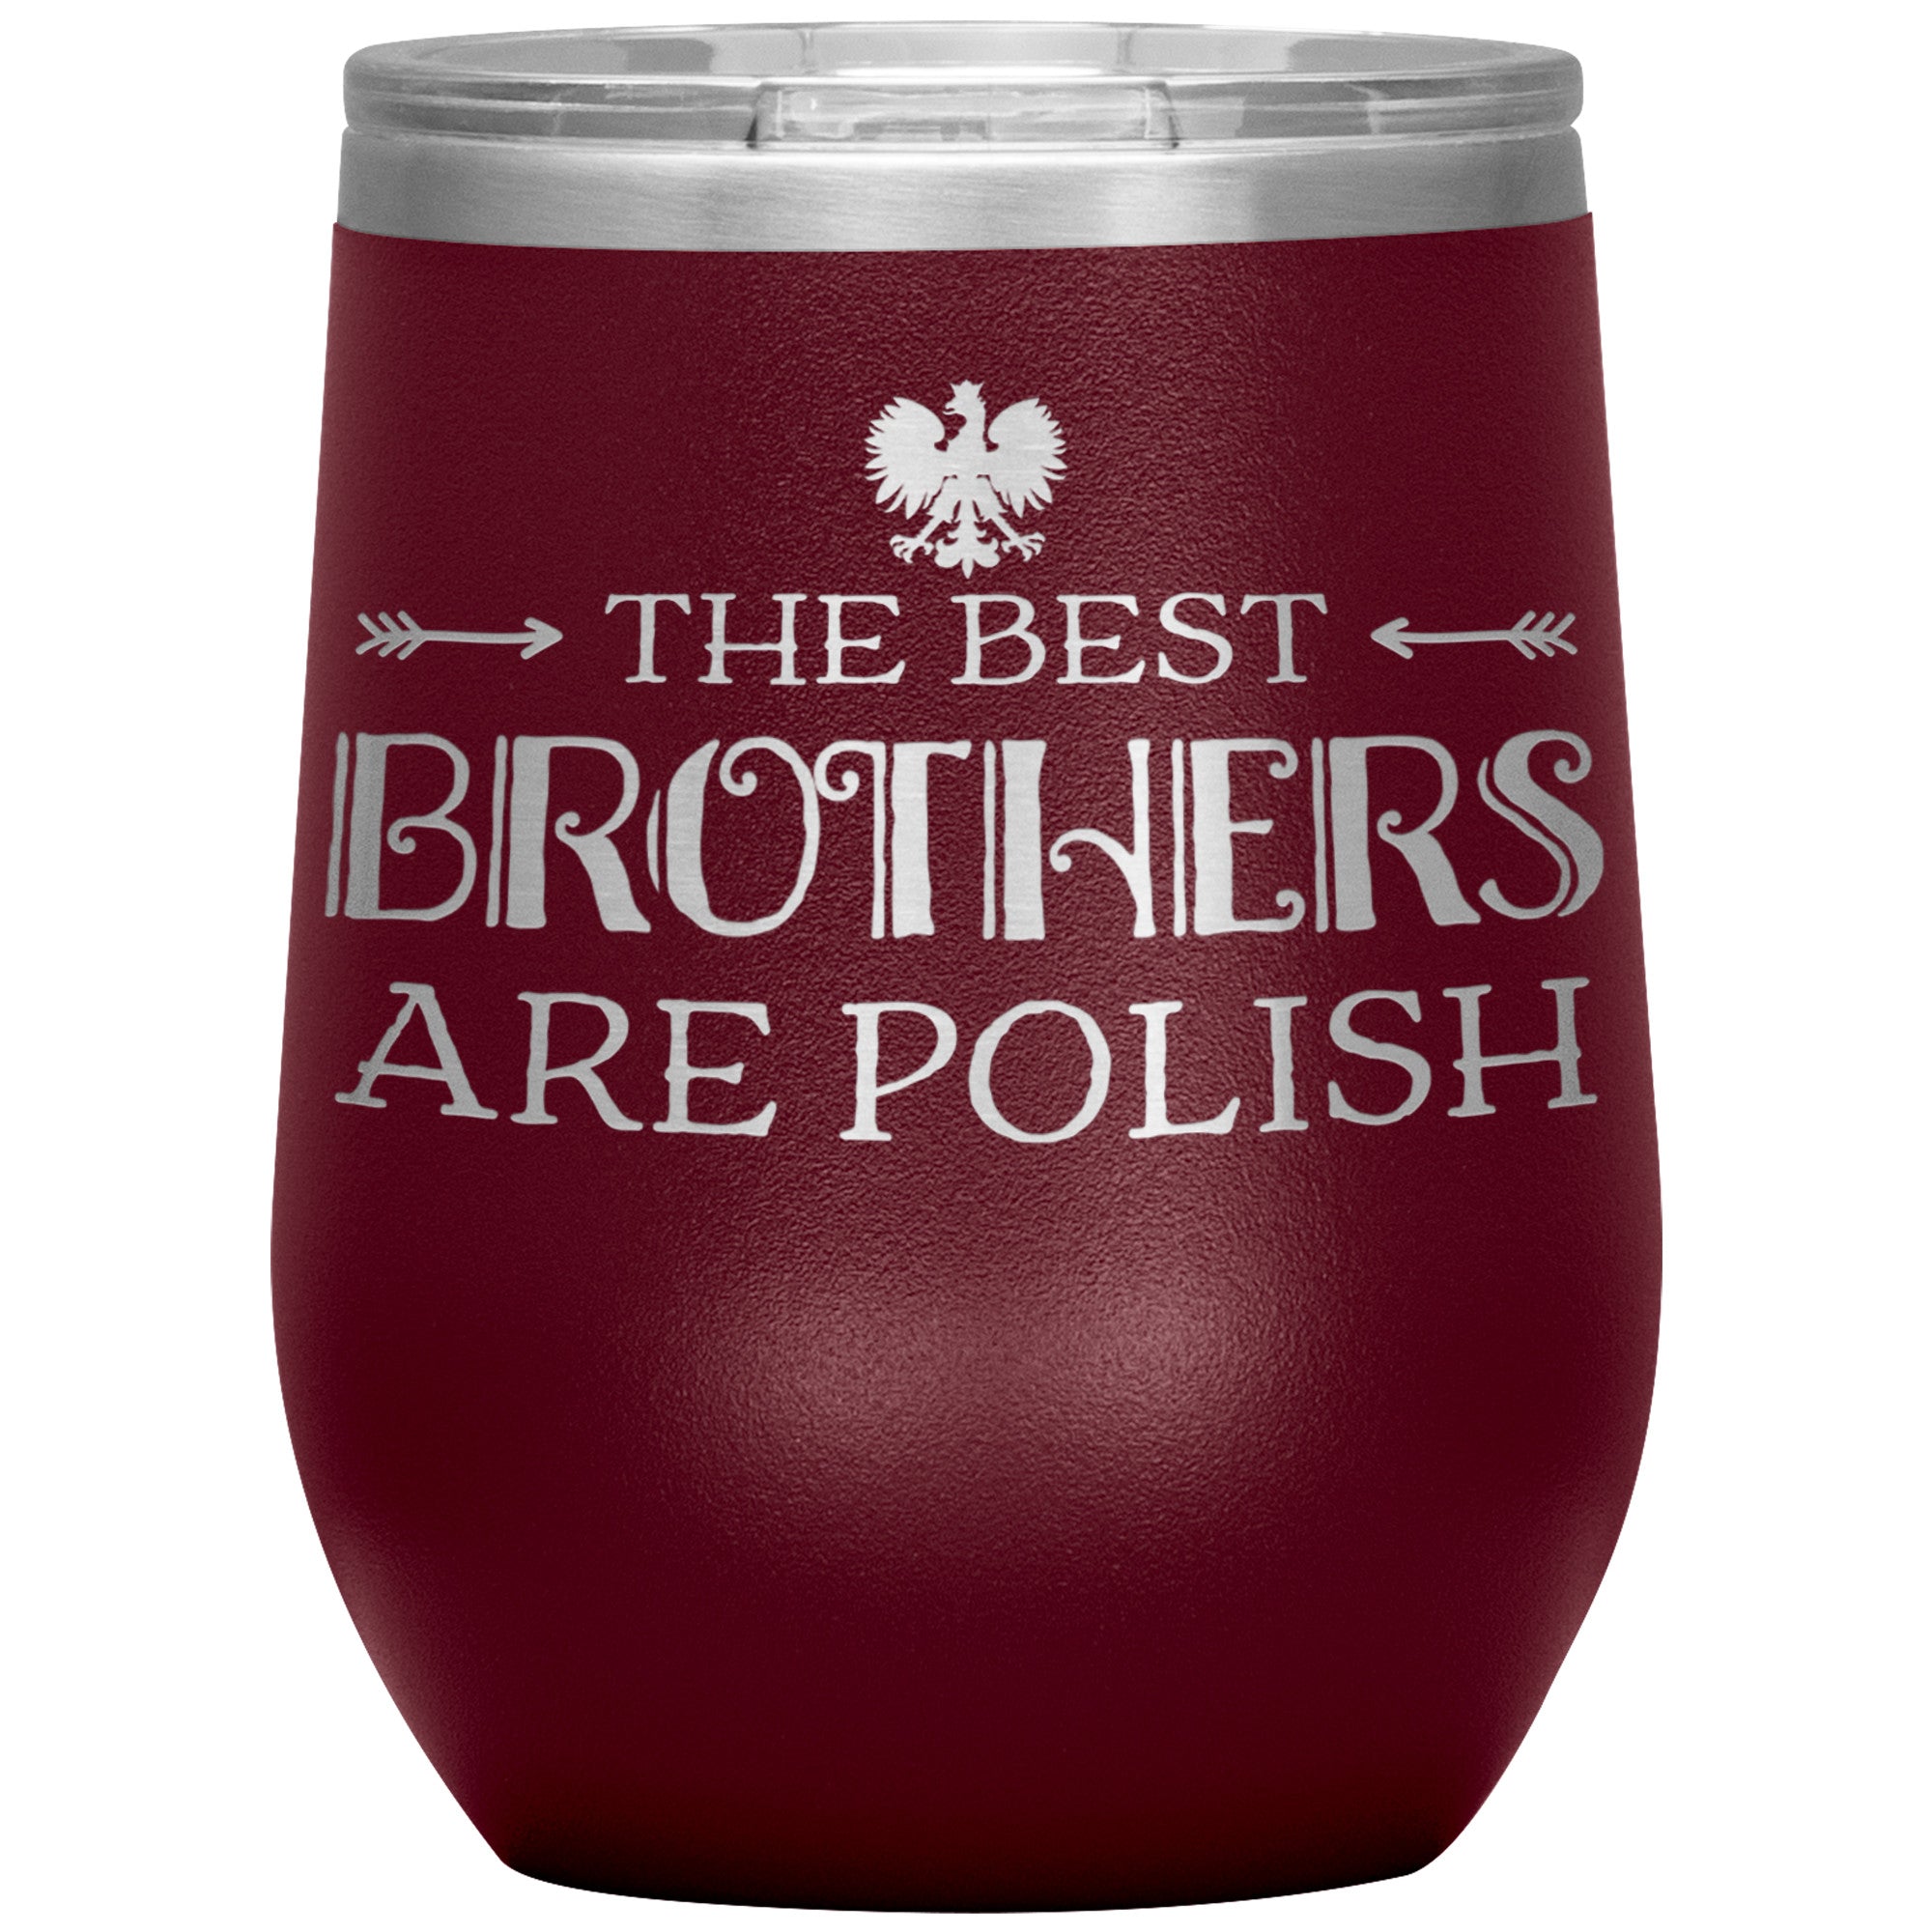 The Best Brothers Are Polish Insulated Wine Tumbler Tumblers teelaunch Maroon  